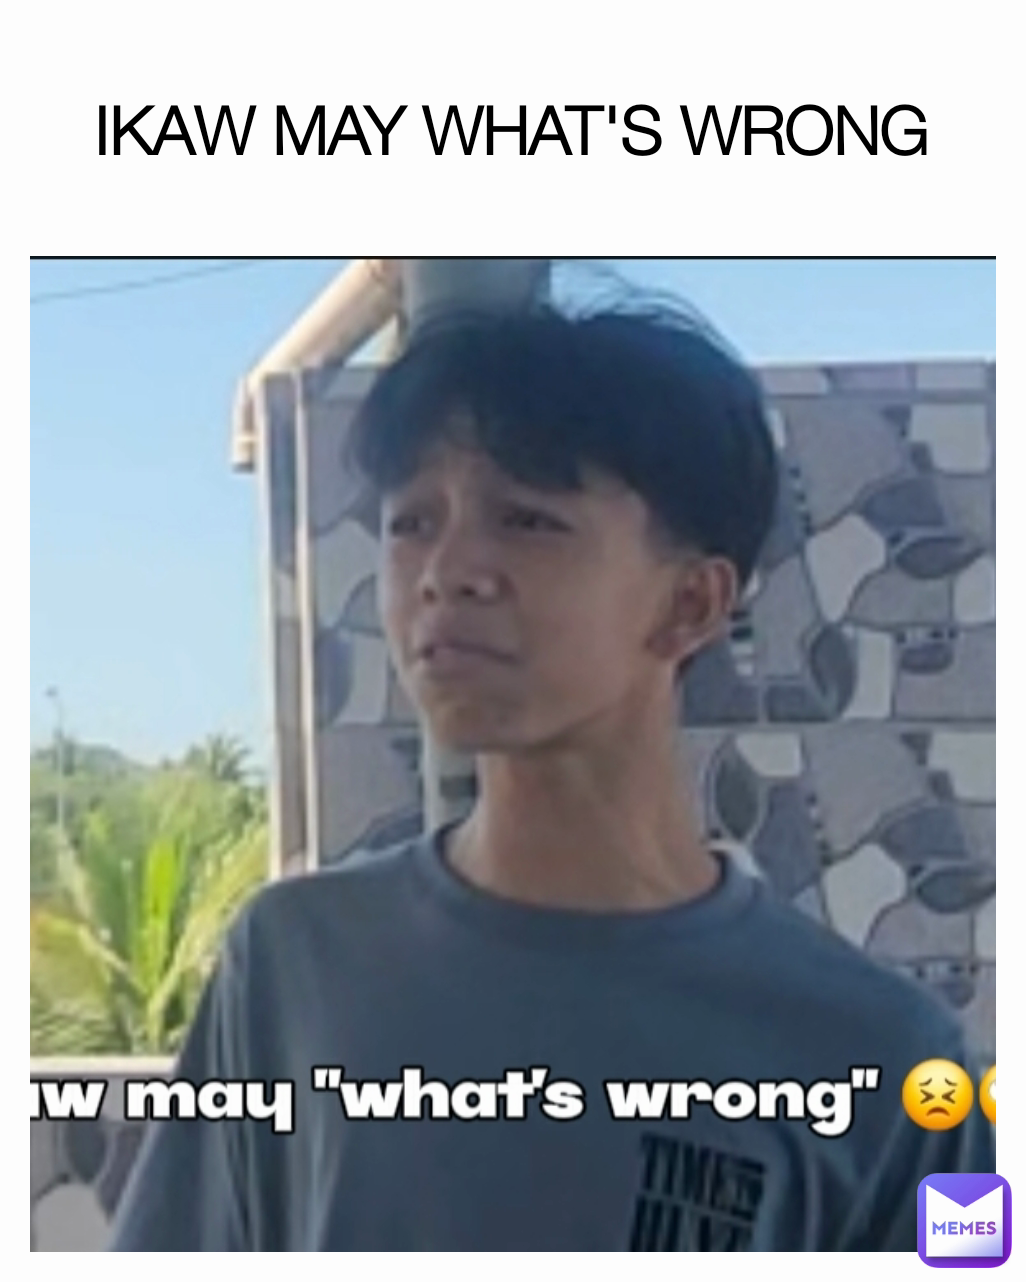 IKAW MAY WHAT'S WRONG